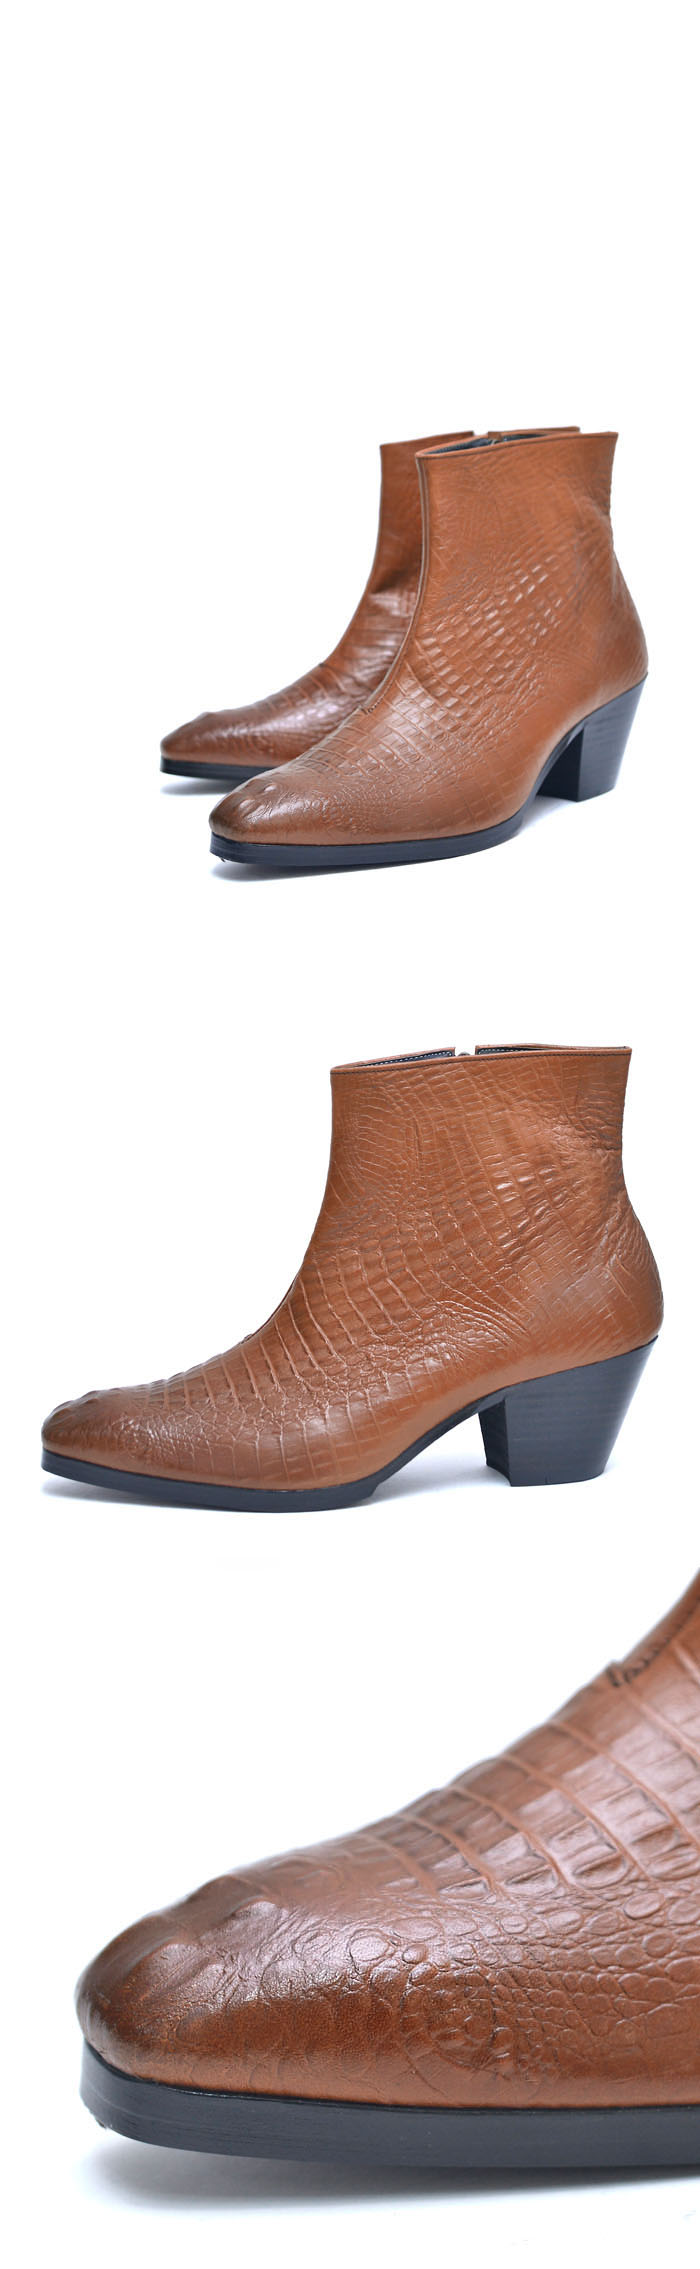 Shoes :: 7cm Heel Crocodile Leather Ankle Boots-Shoes 511